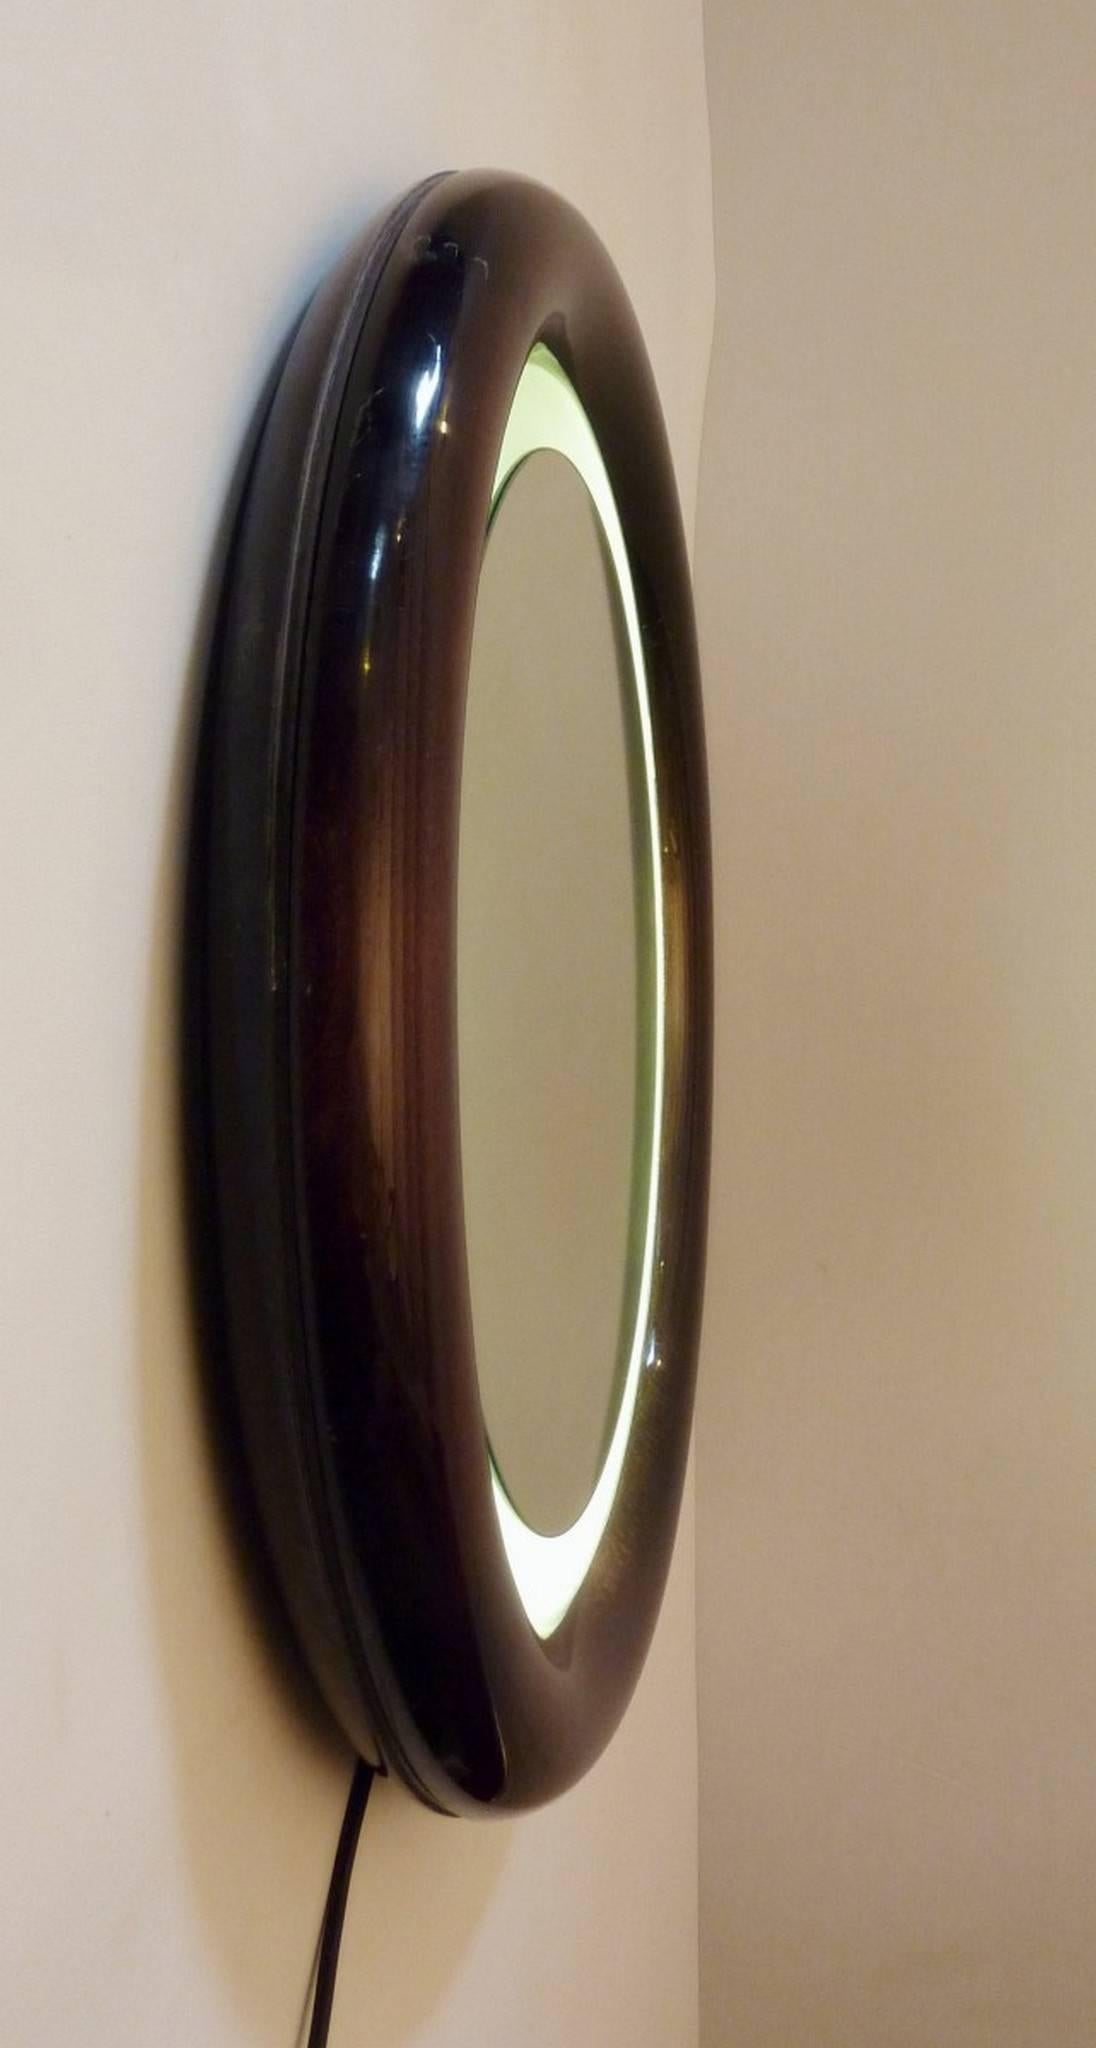 Italian mirror with a round beech frame in high gloss lacquer with back light.